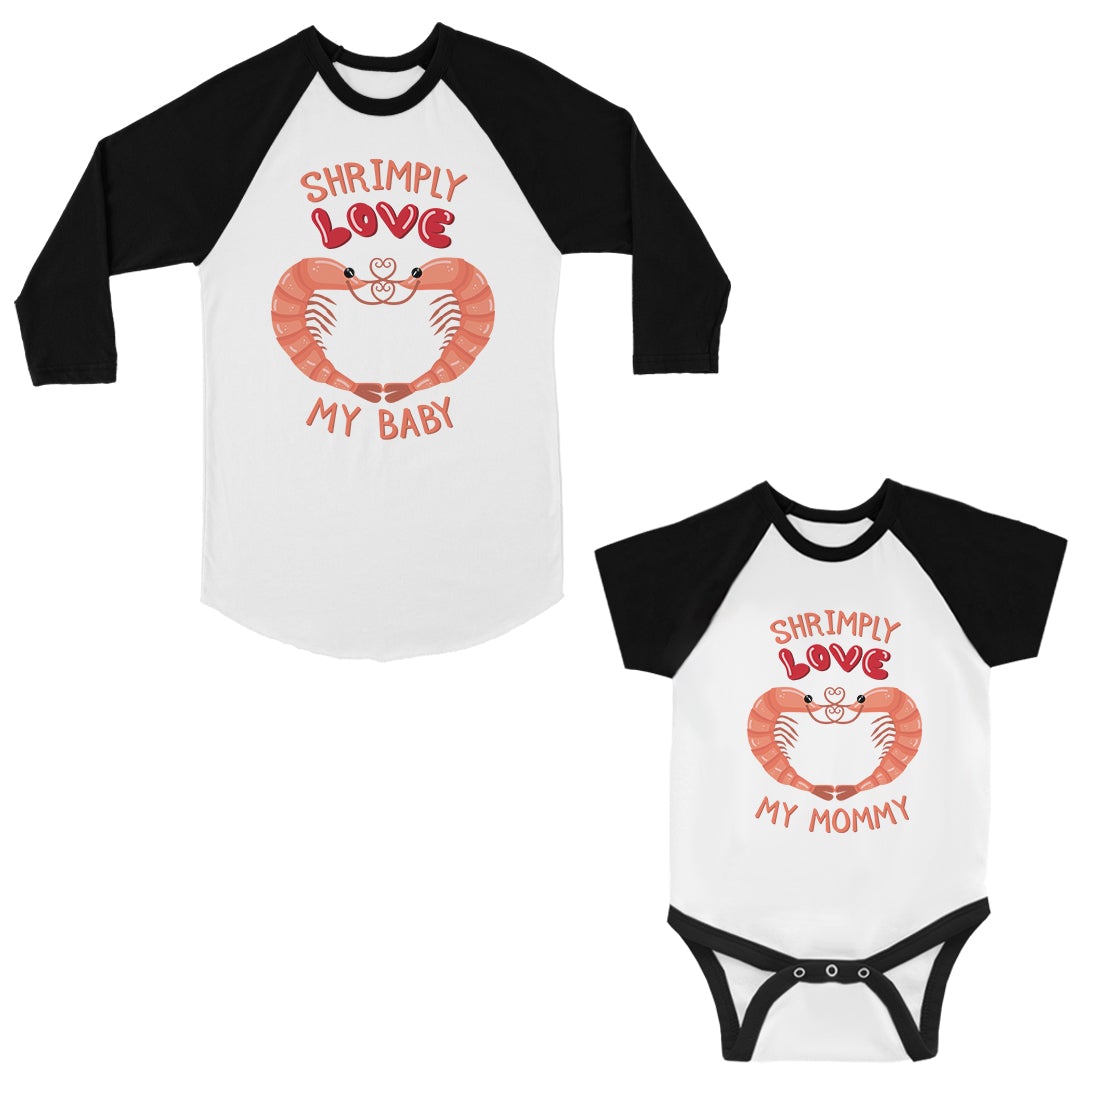 Shrimply Love Baby Mommy Mom and Baby Matching Baseball Shirts Black and White